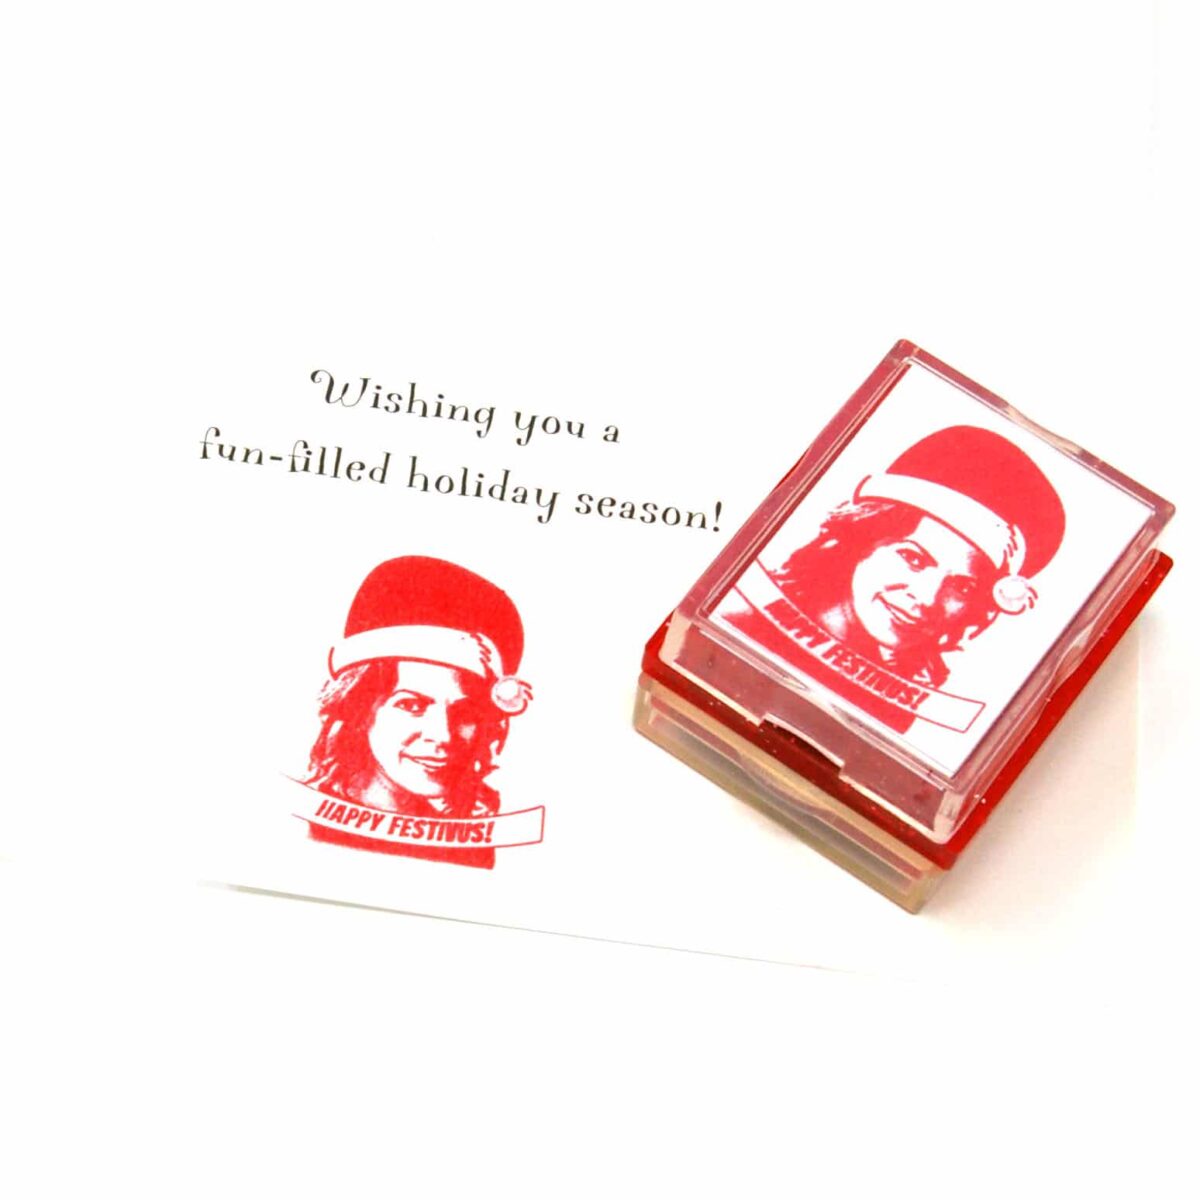 Holiday Rubber Stamps